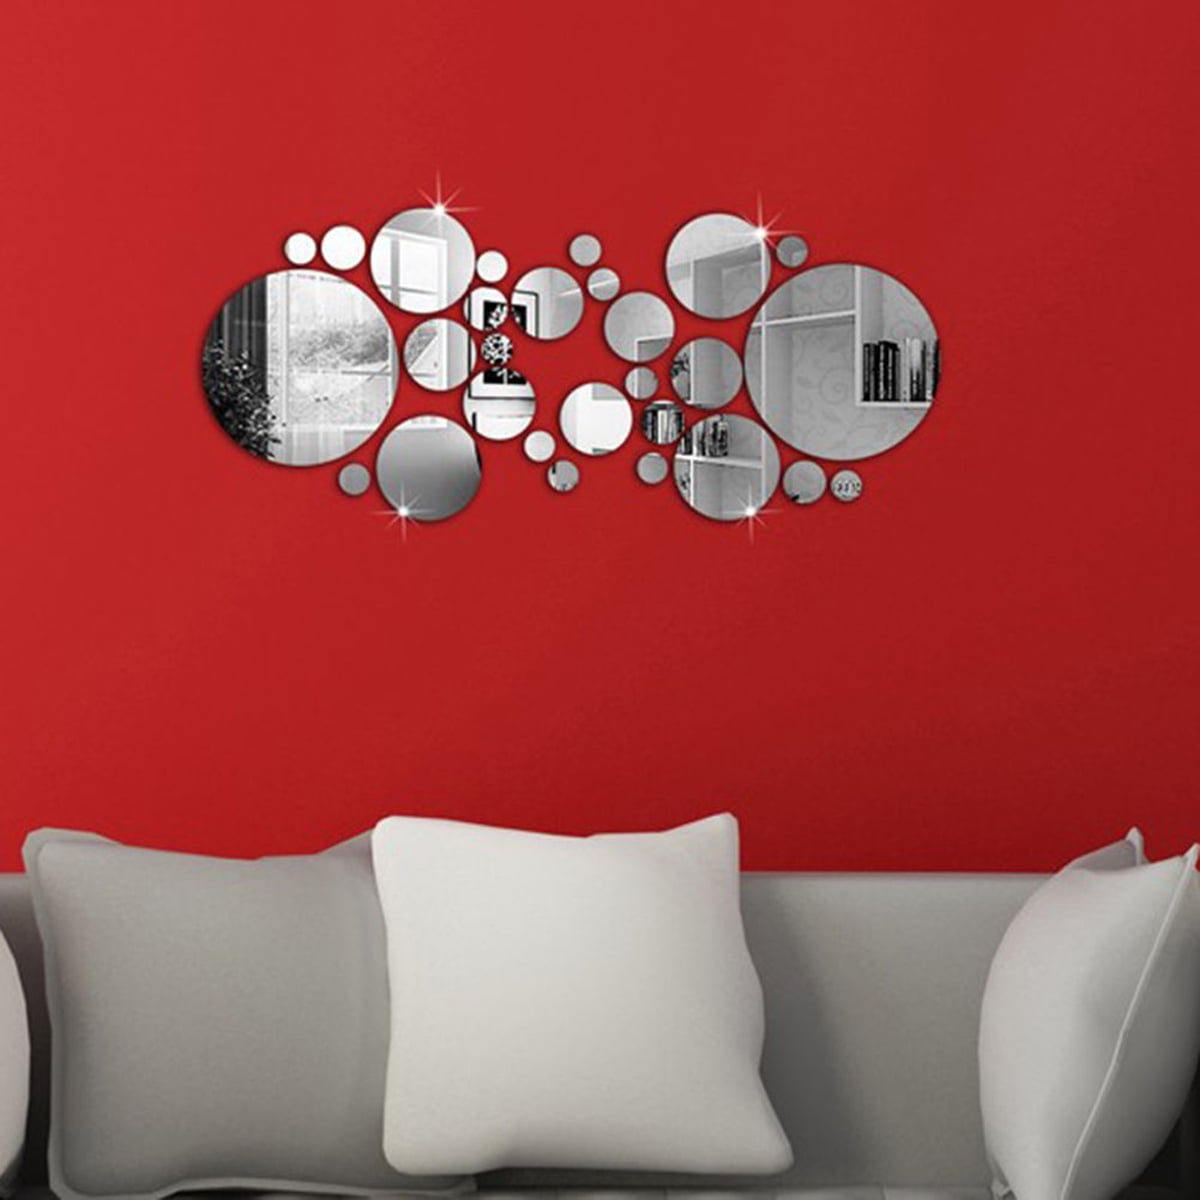 57C8 Silver Gold Wall Stickers 3D Mirror Home Decor Contemporary Wall Decal 